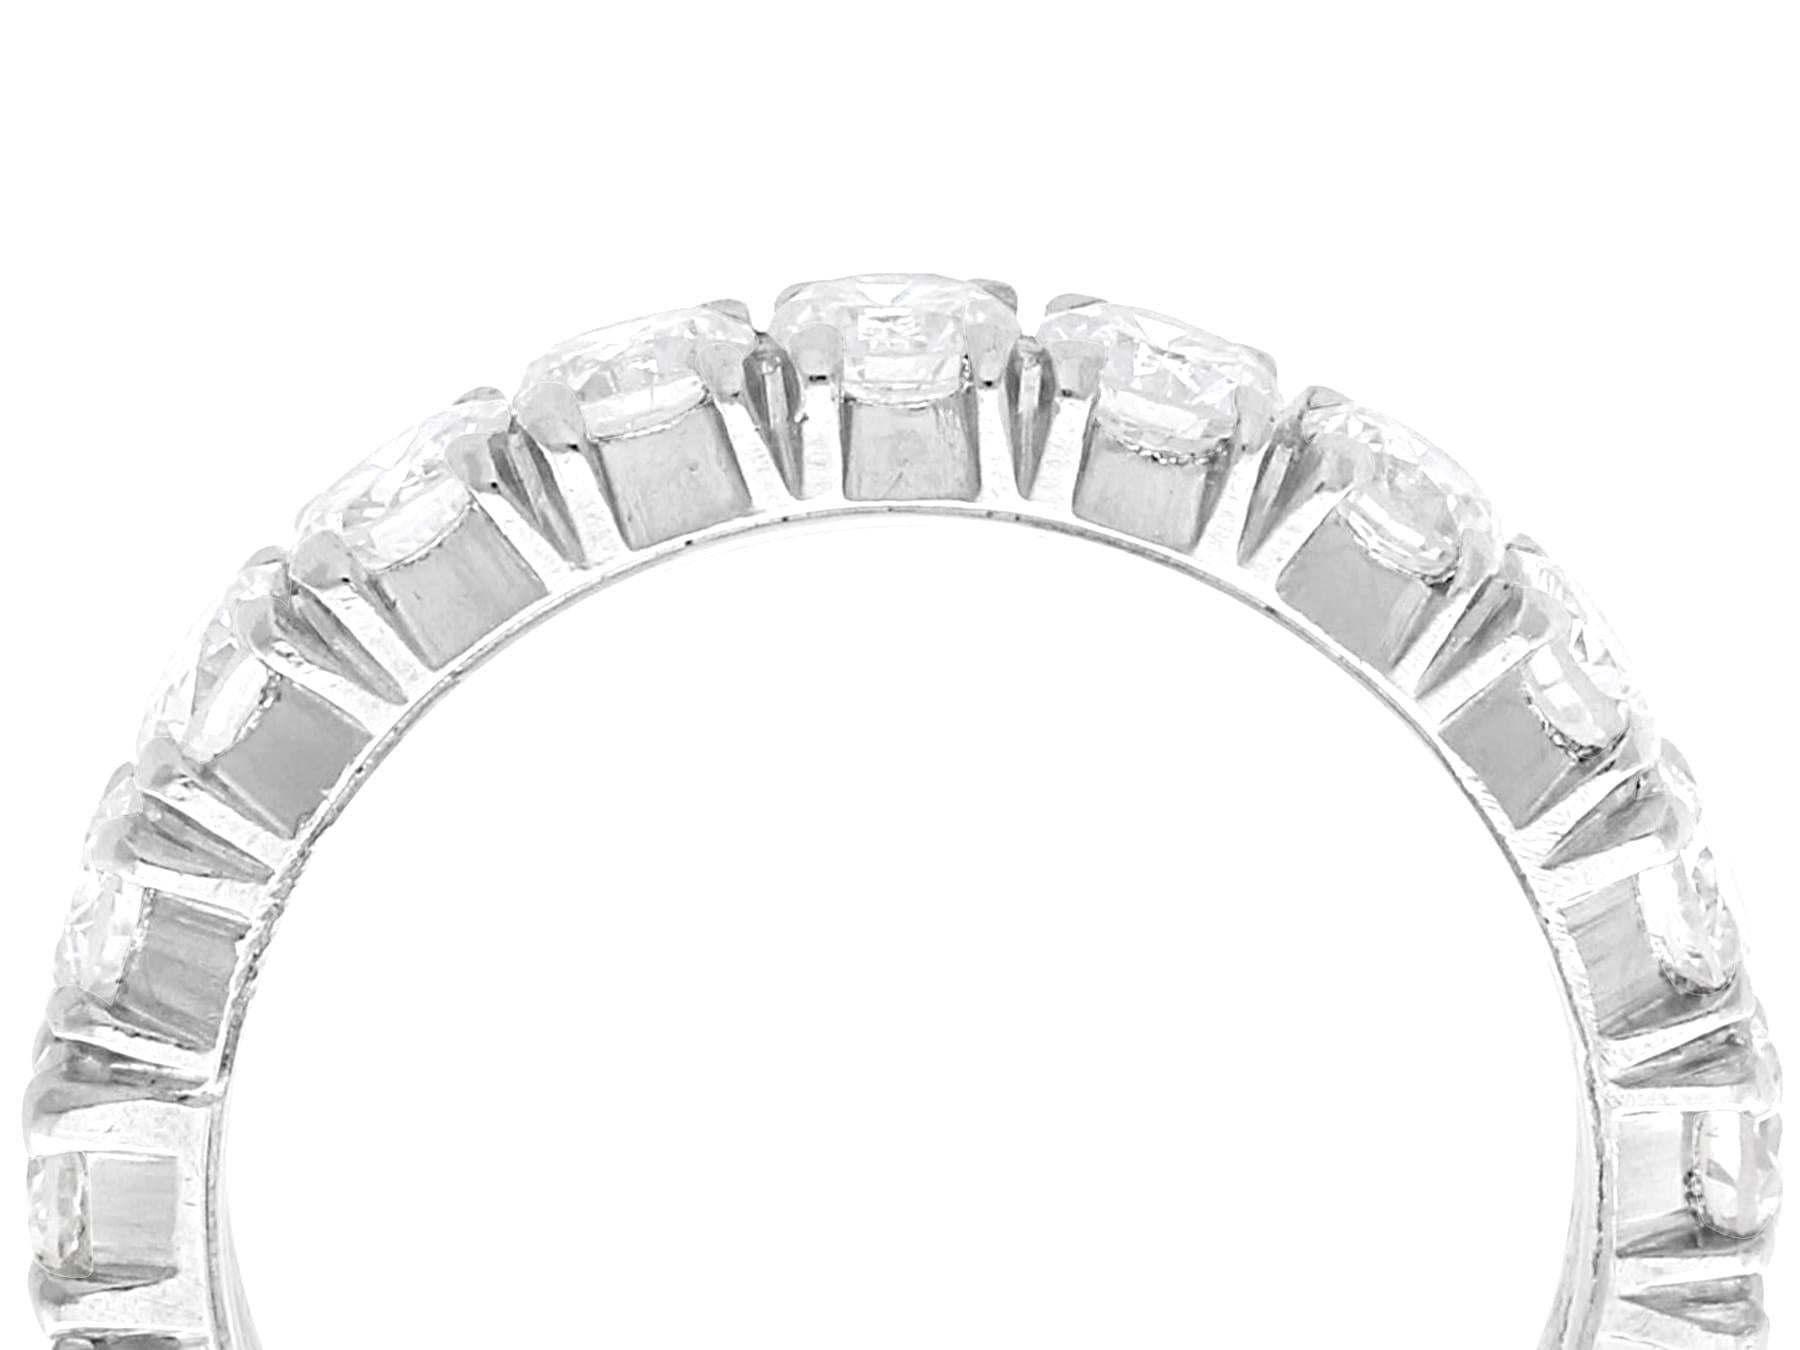 A fine and impressive vintage 1950's 1.80 carat diamond platinum full eternity ring; part of our diverse diamond jewellery and estate jewelry collections.

This stunning, fine and impressive 1950s diamond eternity band has been crafted in